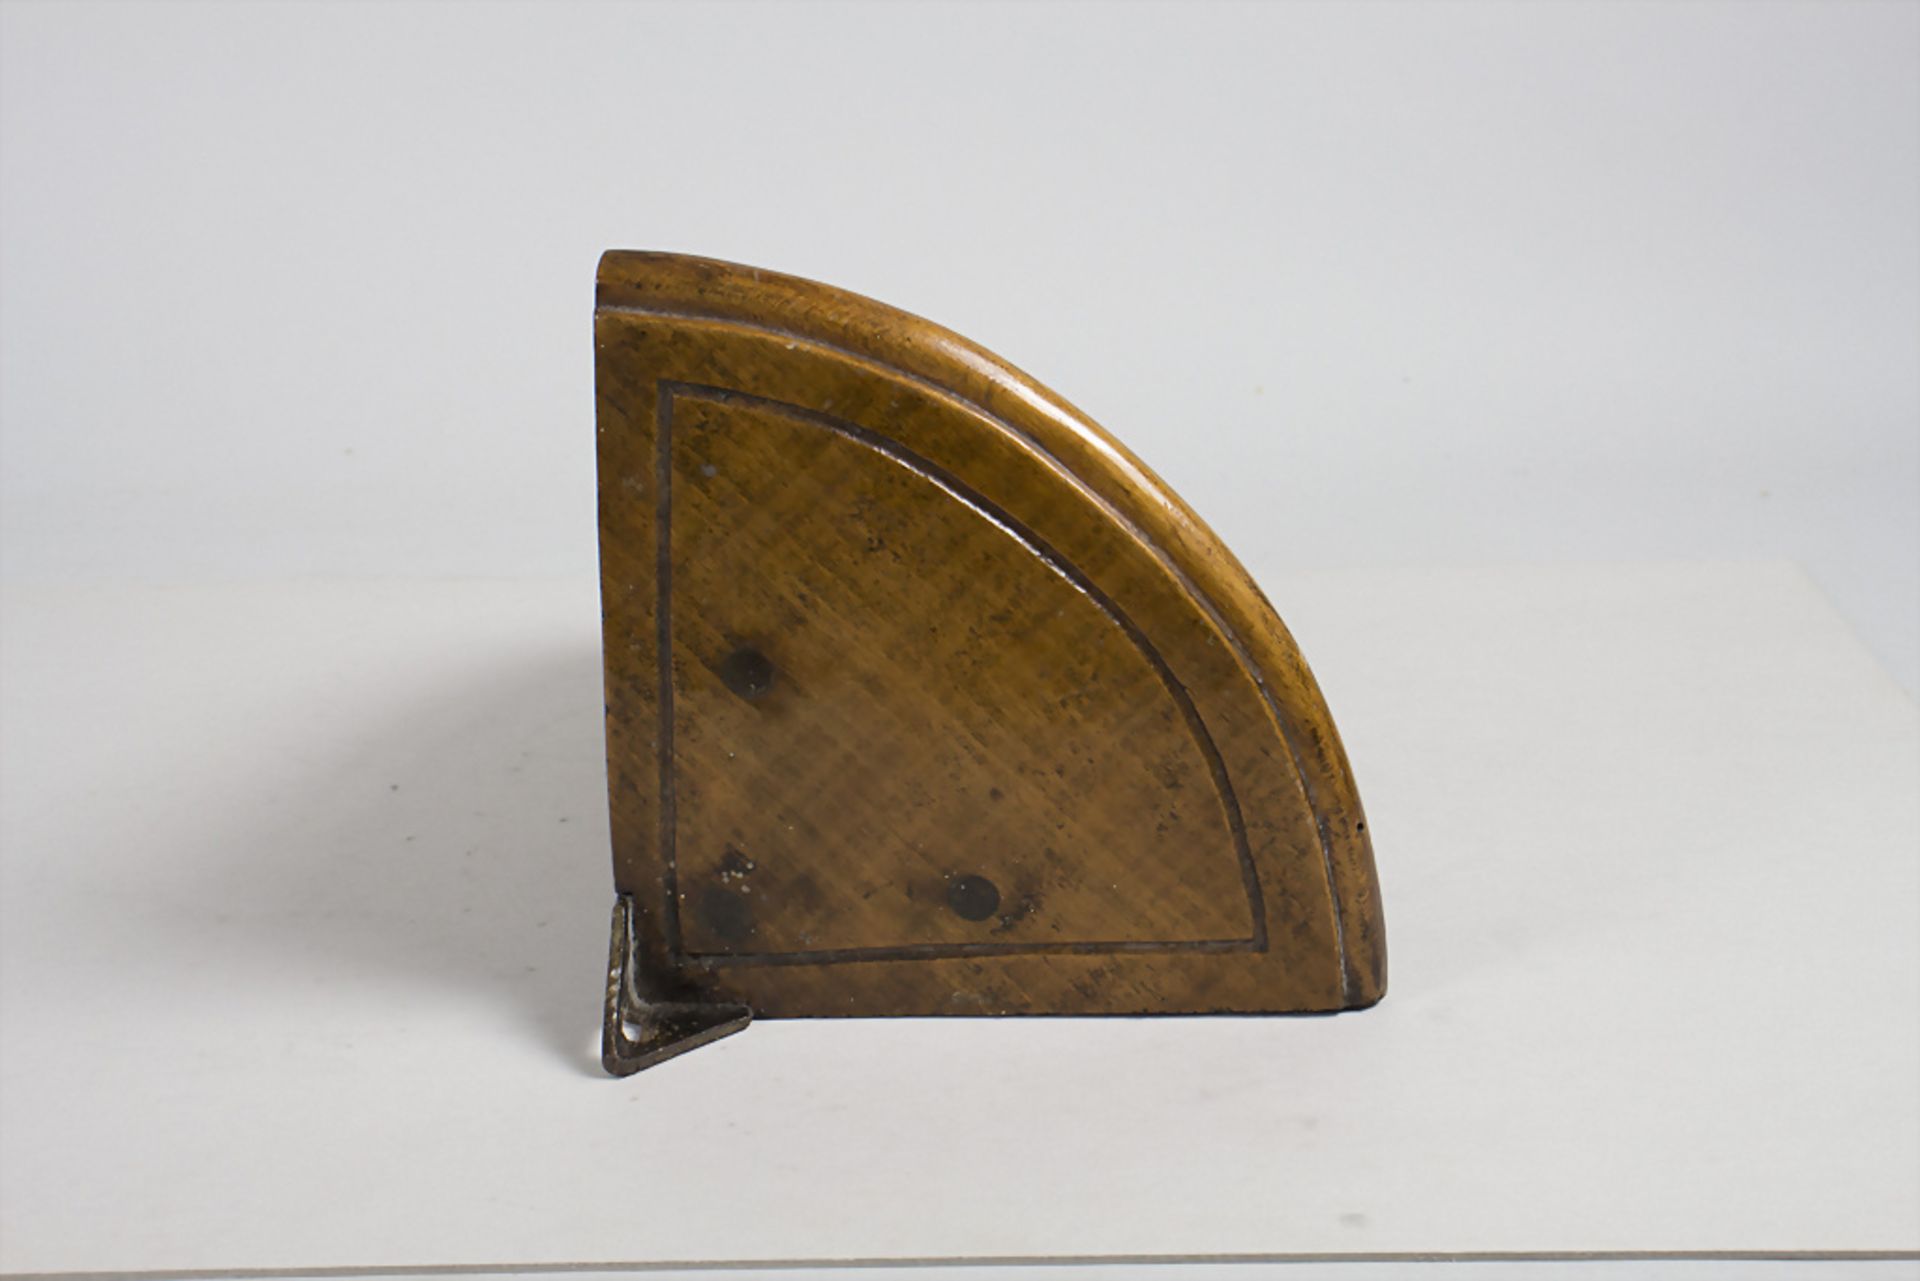 Eckkonsole mit Frauenkopf / A wooden console with the head of a young woman, 1970 - Bild 2 aus 5